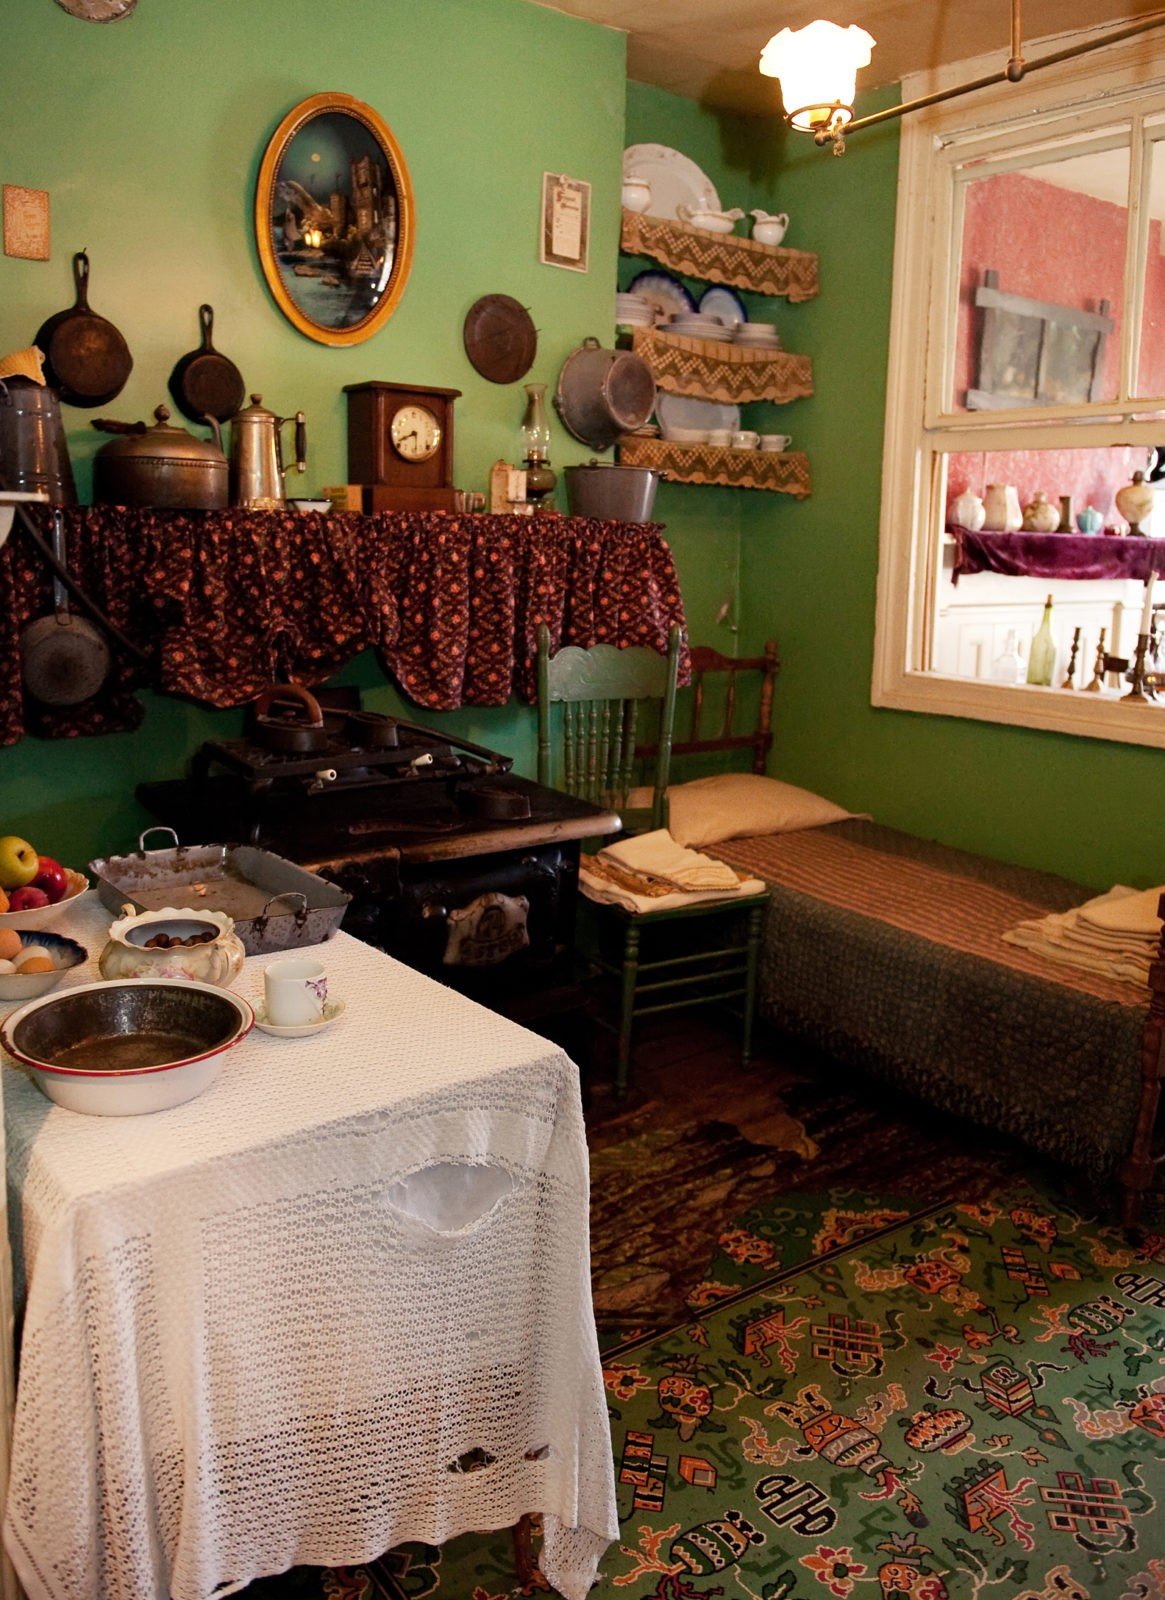 Color photo of the Rogarshevsky family kitchen at 97 Orchard Street where cookware sits on a ledge above a stove nestled between a small bed, chair, and table.